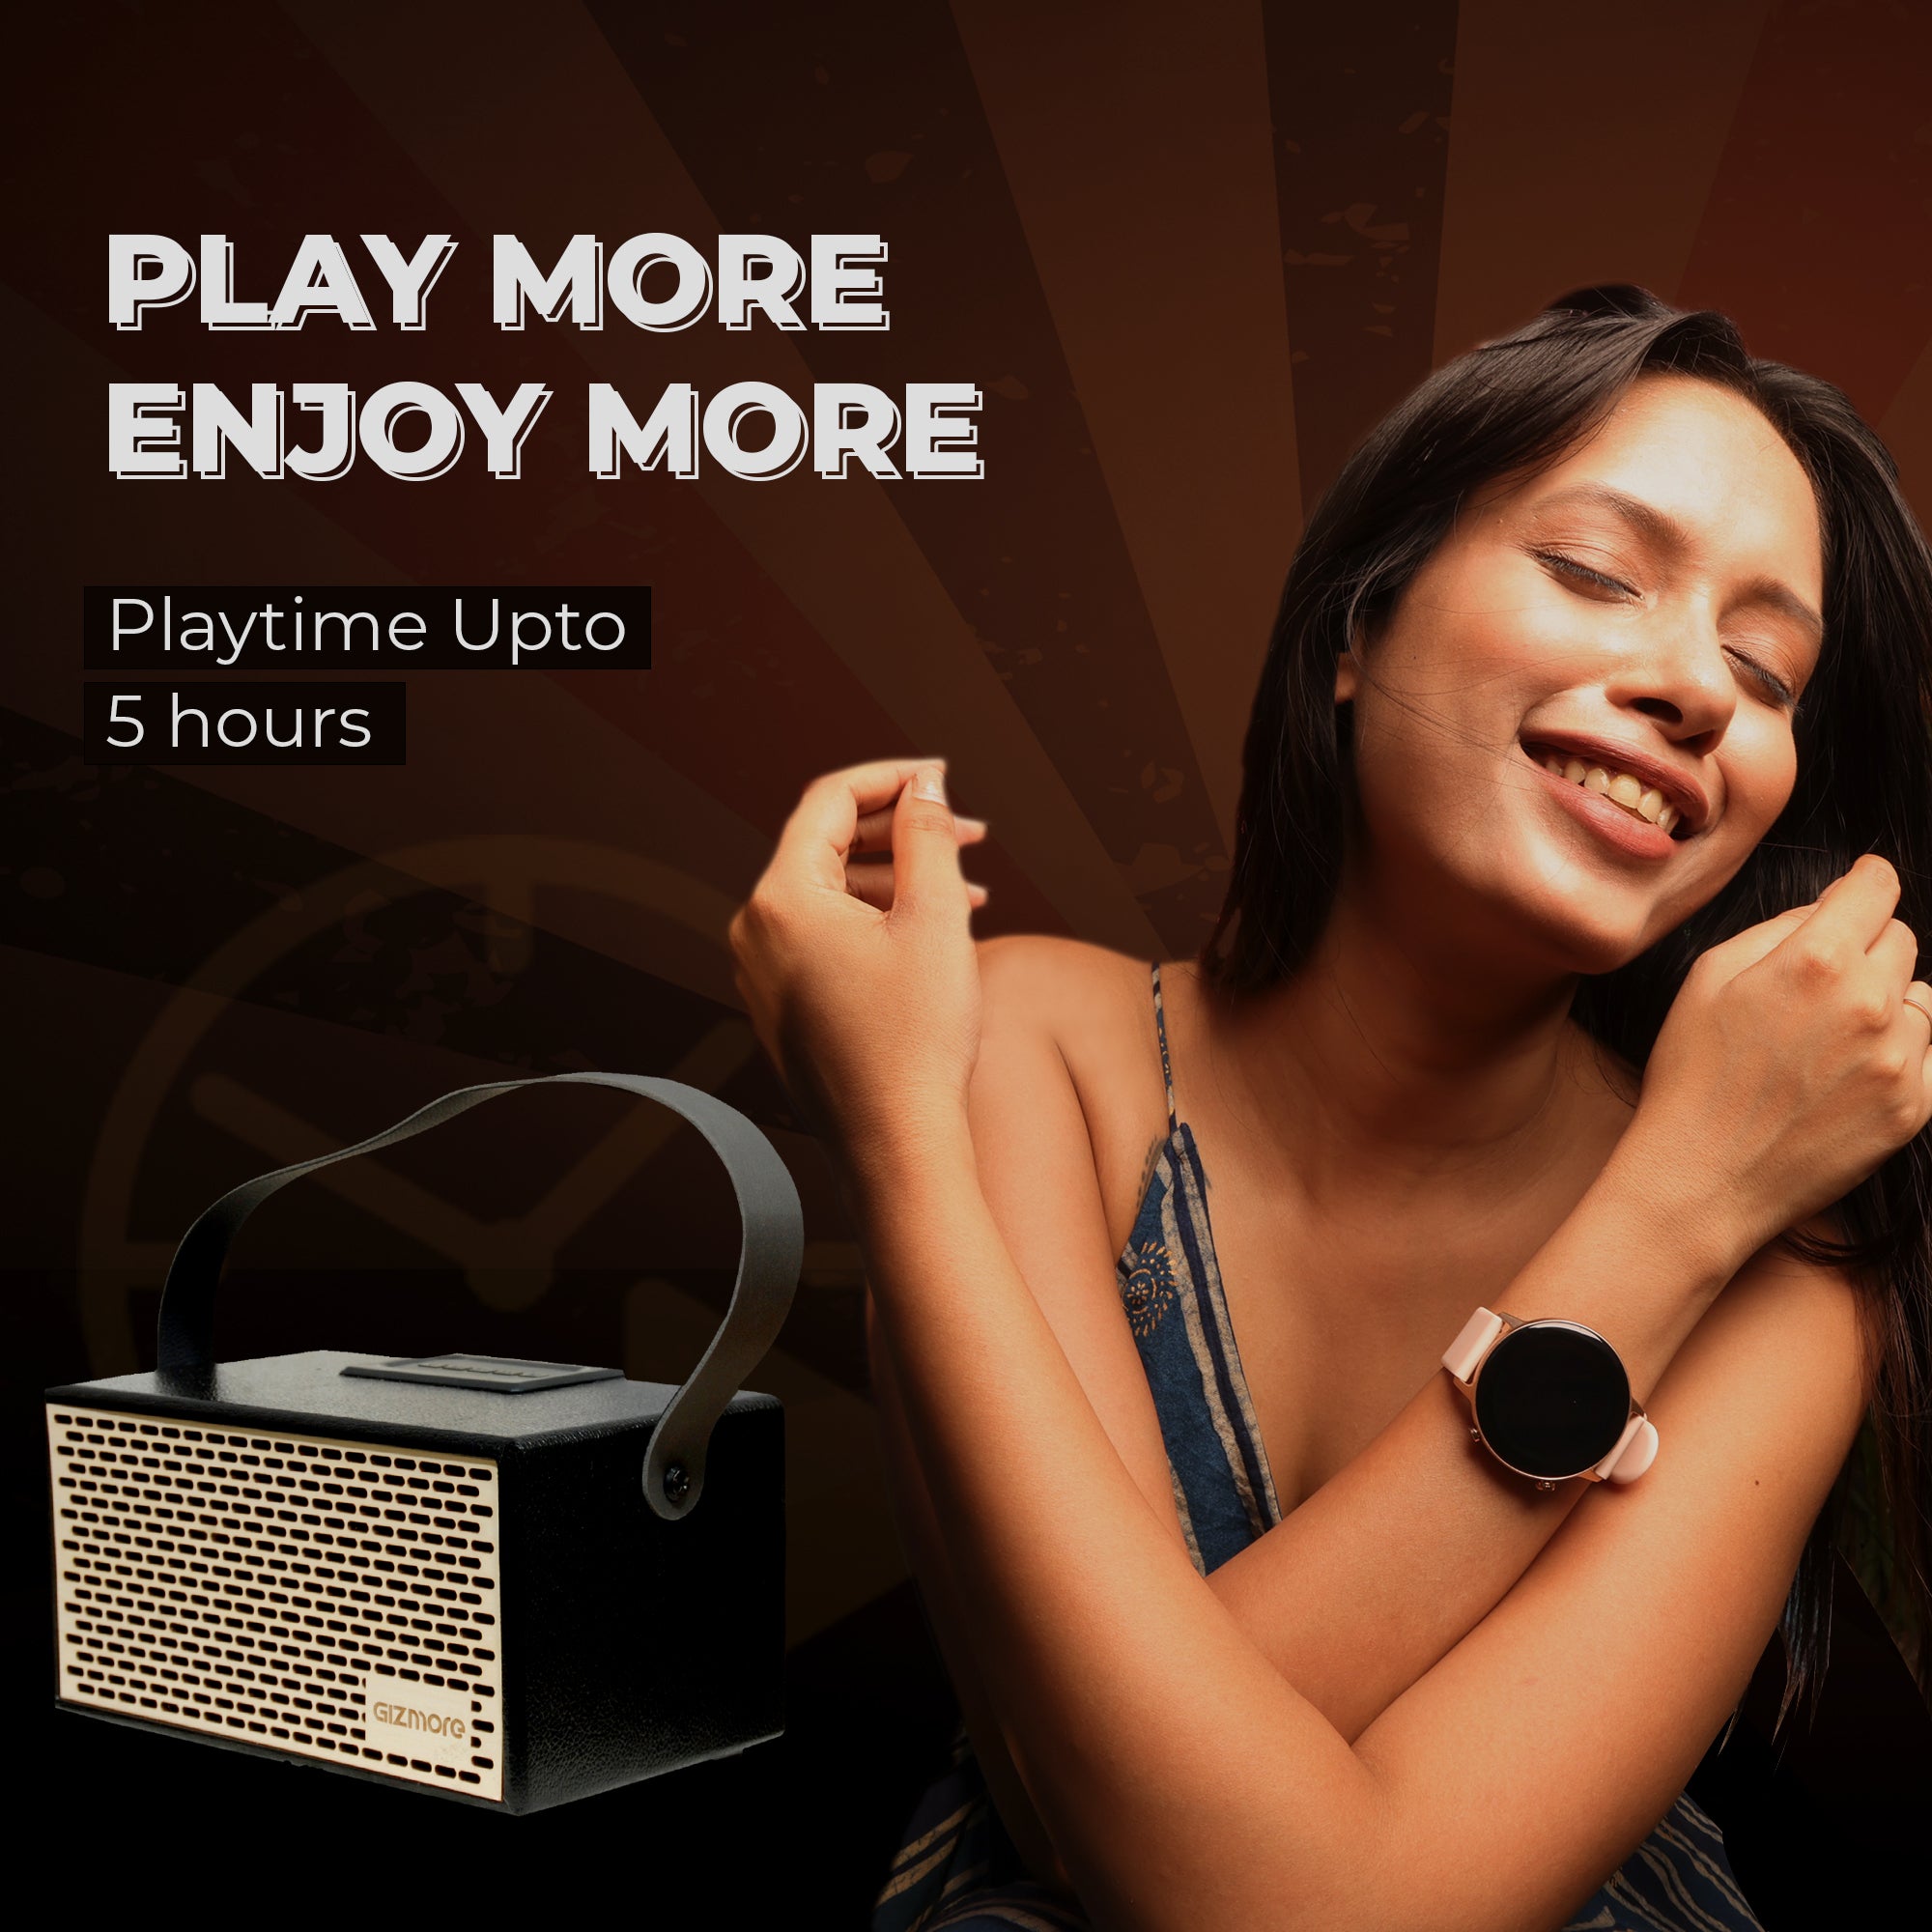 Gizmore GIZ MS516 Portable Speaker| Wooden Cabinet With Leather Strap, 5H Playback 16 W Bluetooth Party Speaker